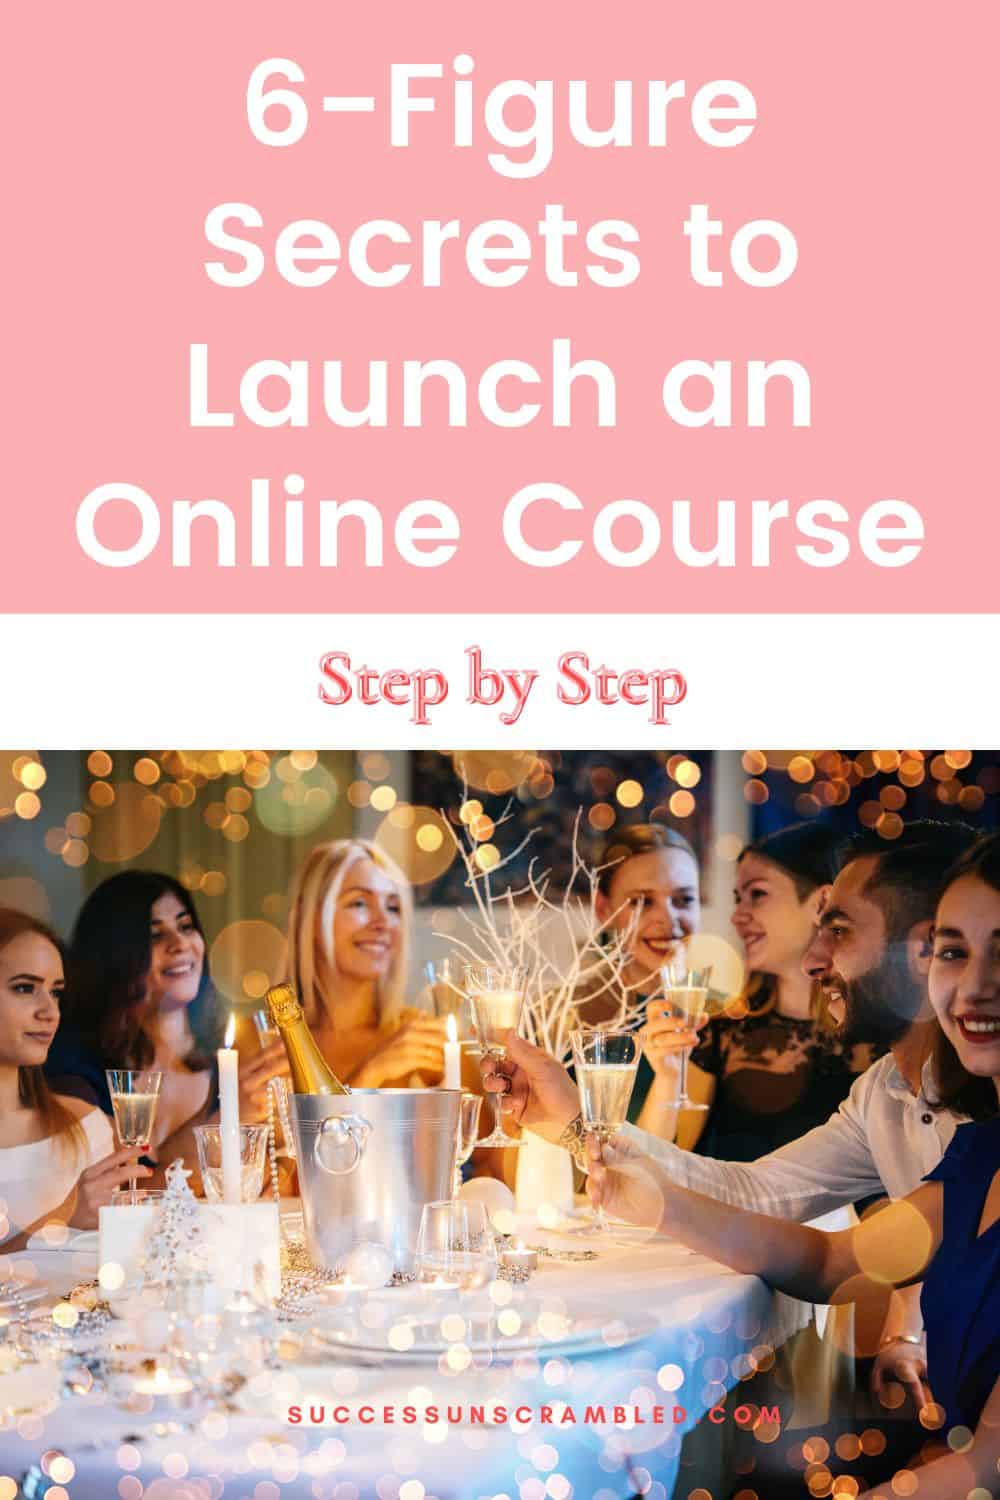 A group of people sitting at a table with glasses raise about to toast and celebrate an online course launch